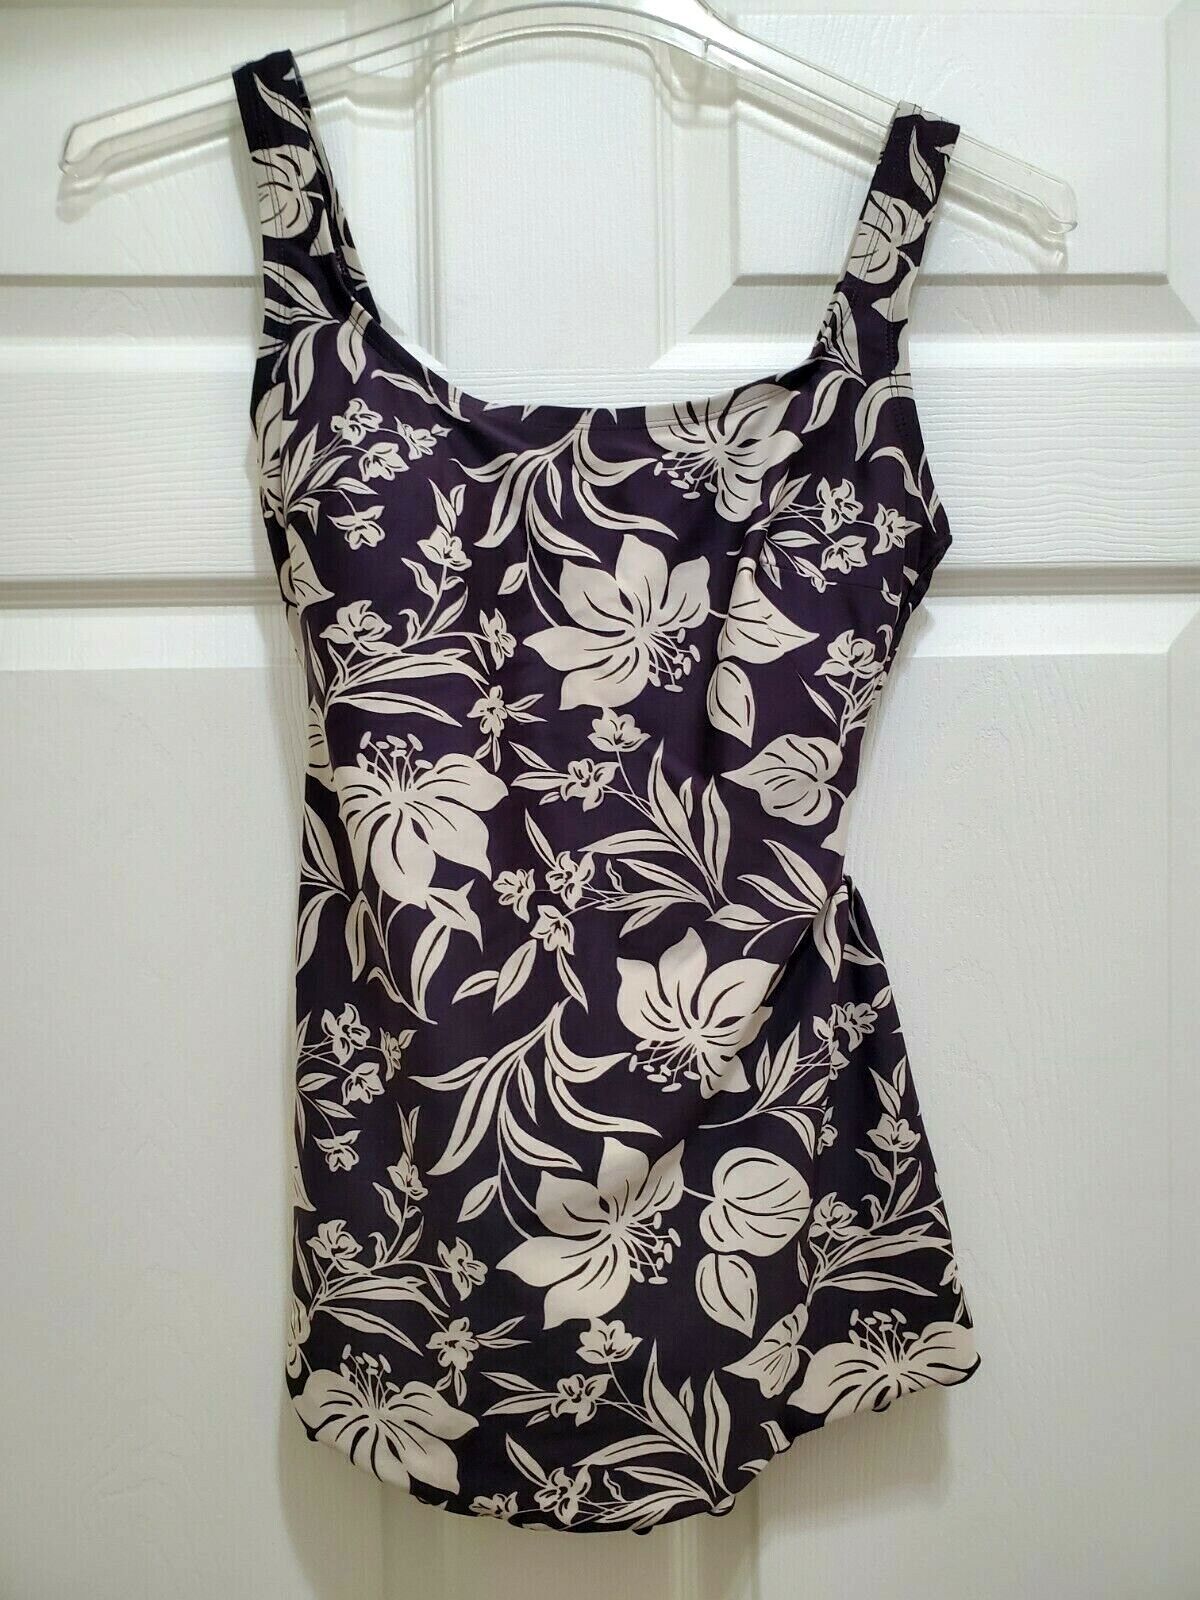 Primary image for Indigo Bay Women's 10 One Piece Skirted Bathing Suit Black and Cream Floral